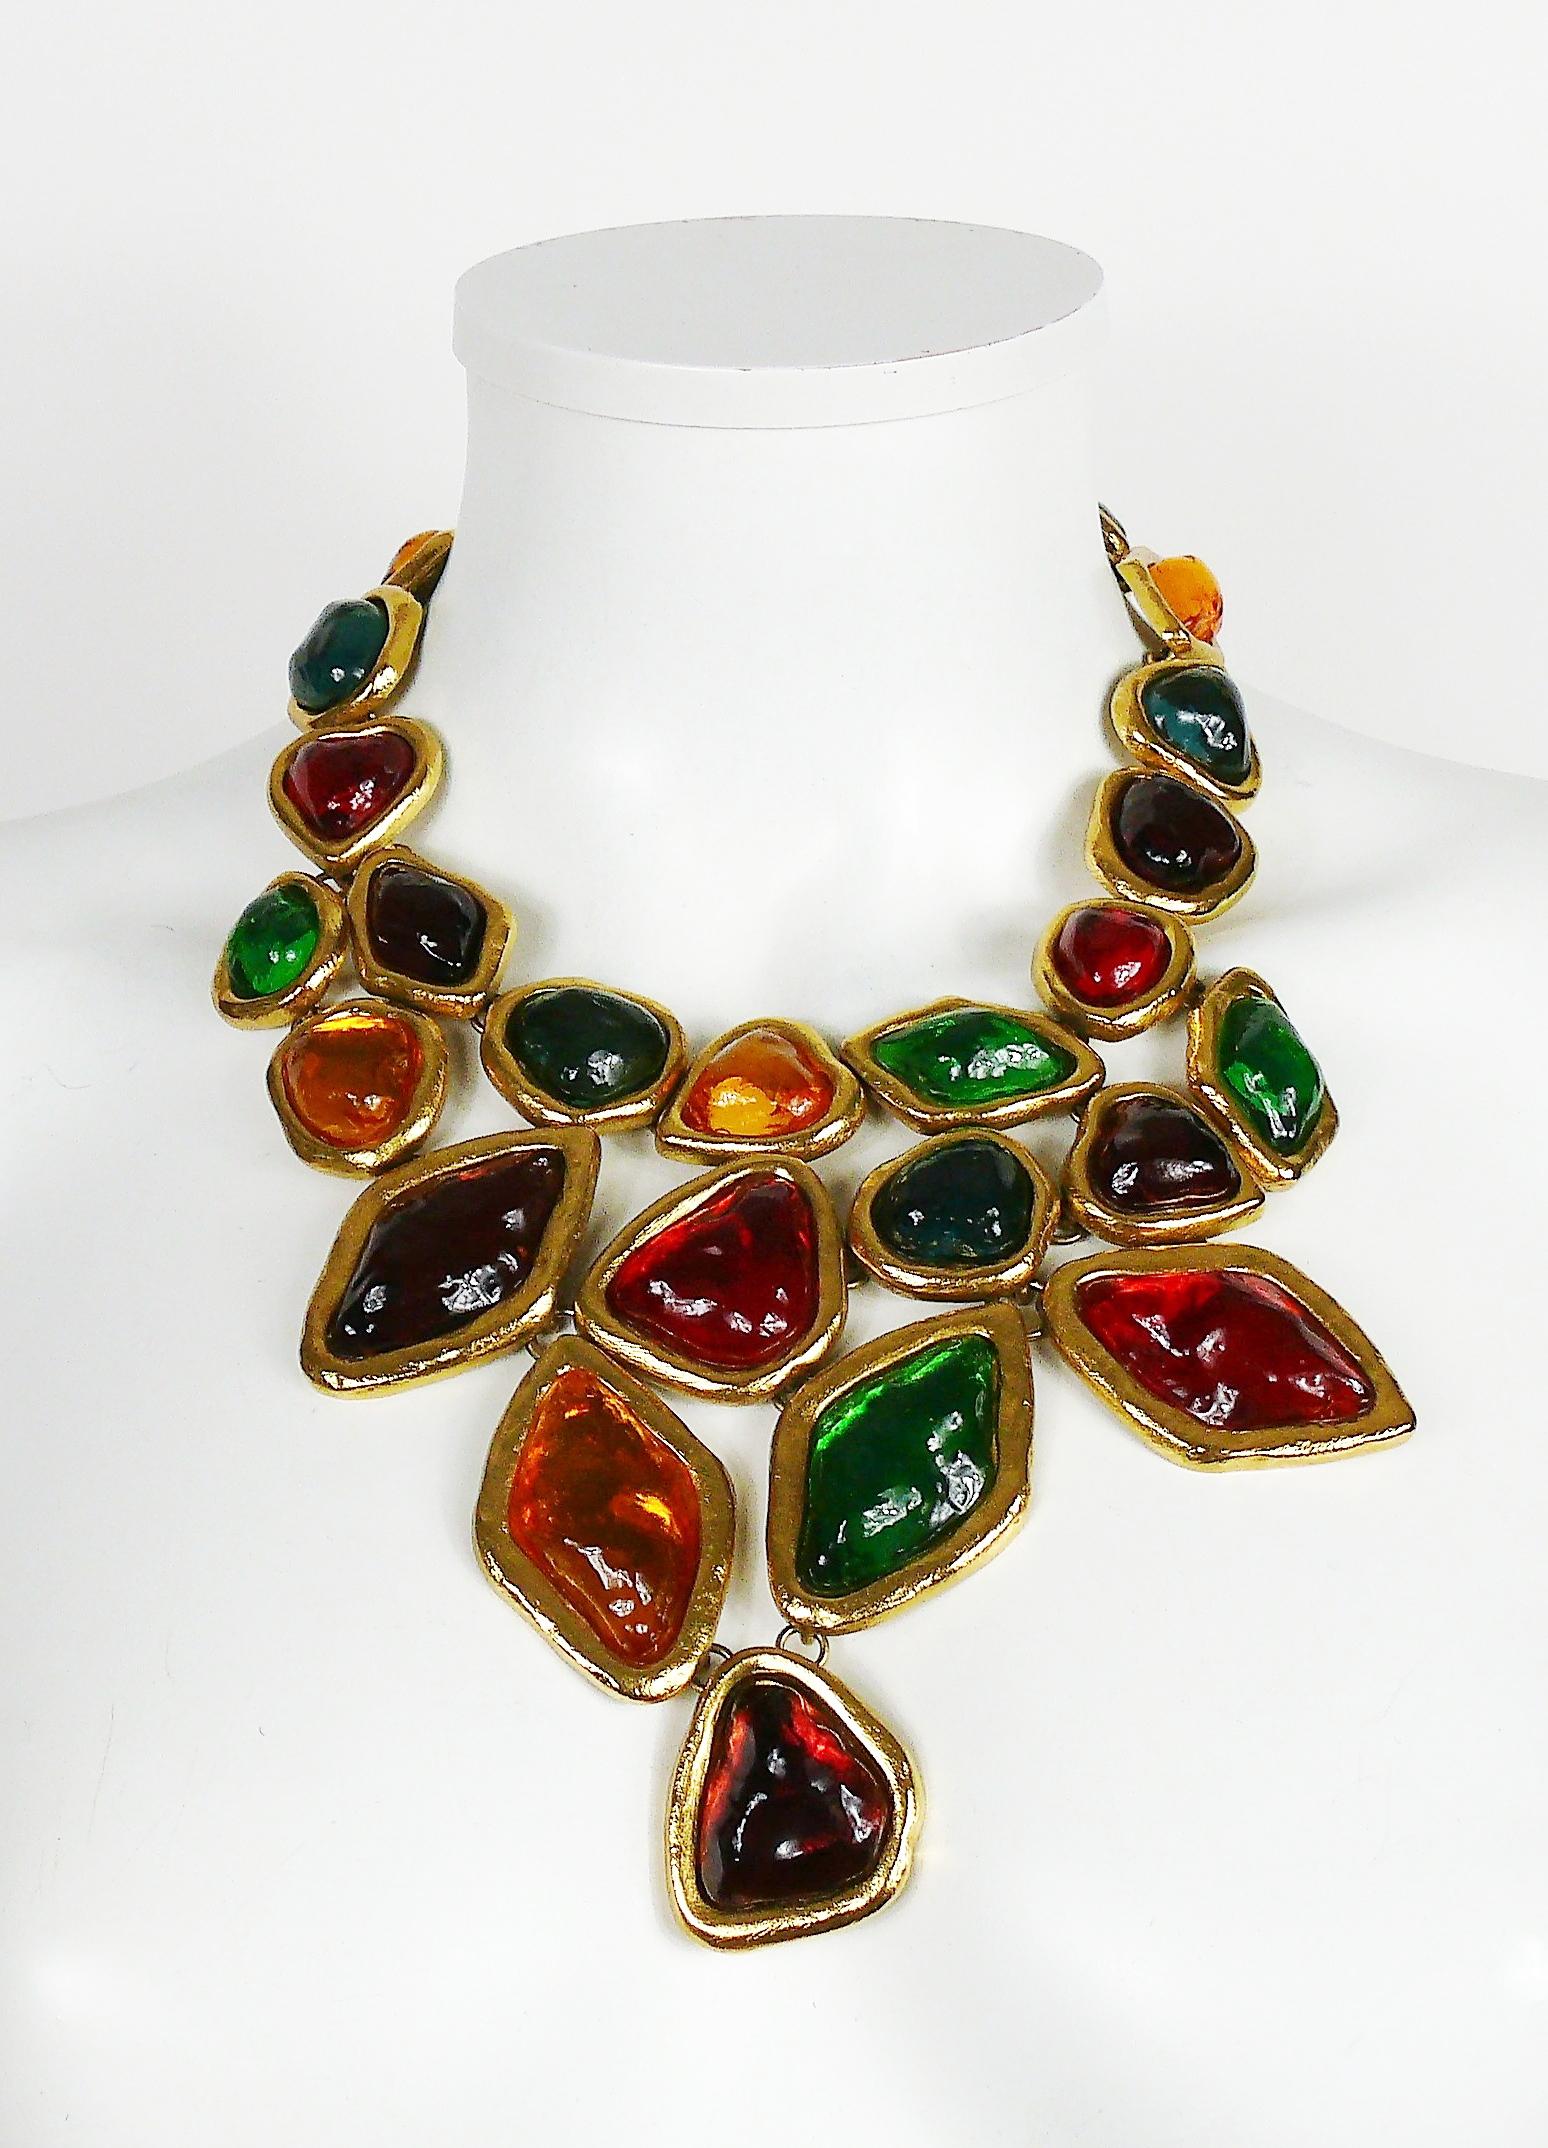 YVES SAINT LAURENT dramatic multi jewelled plastron necklace featuring vibrant multi colour poured resin stones and cabochons in a gold toned setting.

One of the most amazing and desirable YVES SAINT LAURENT costume jewelry necklace !

Adjustable